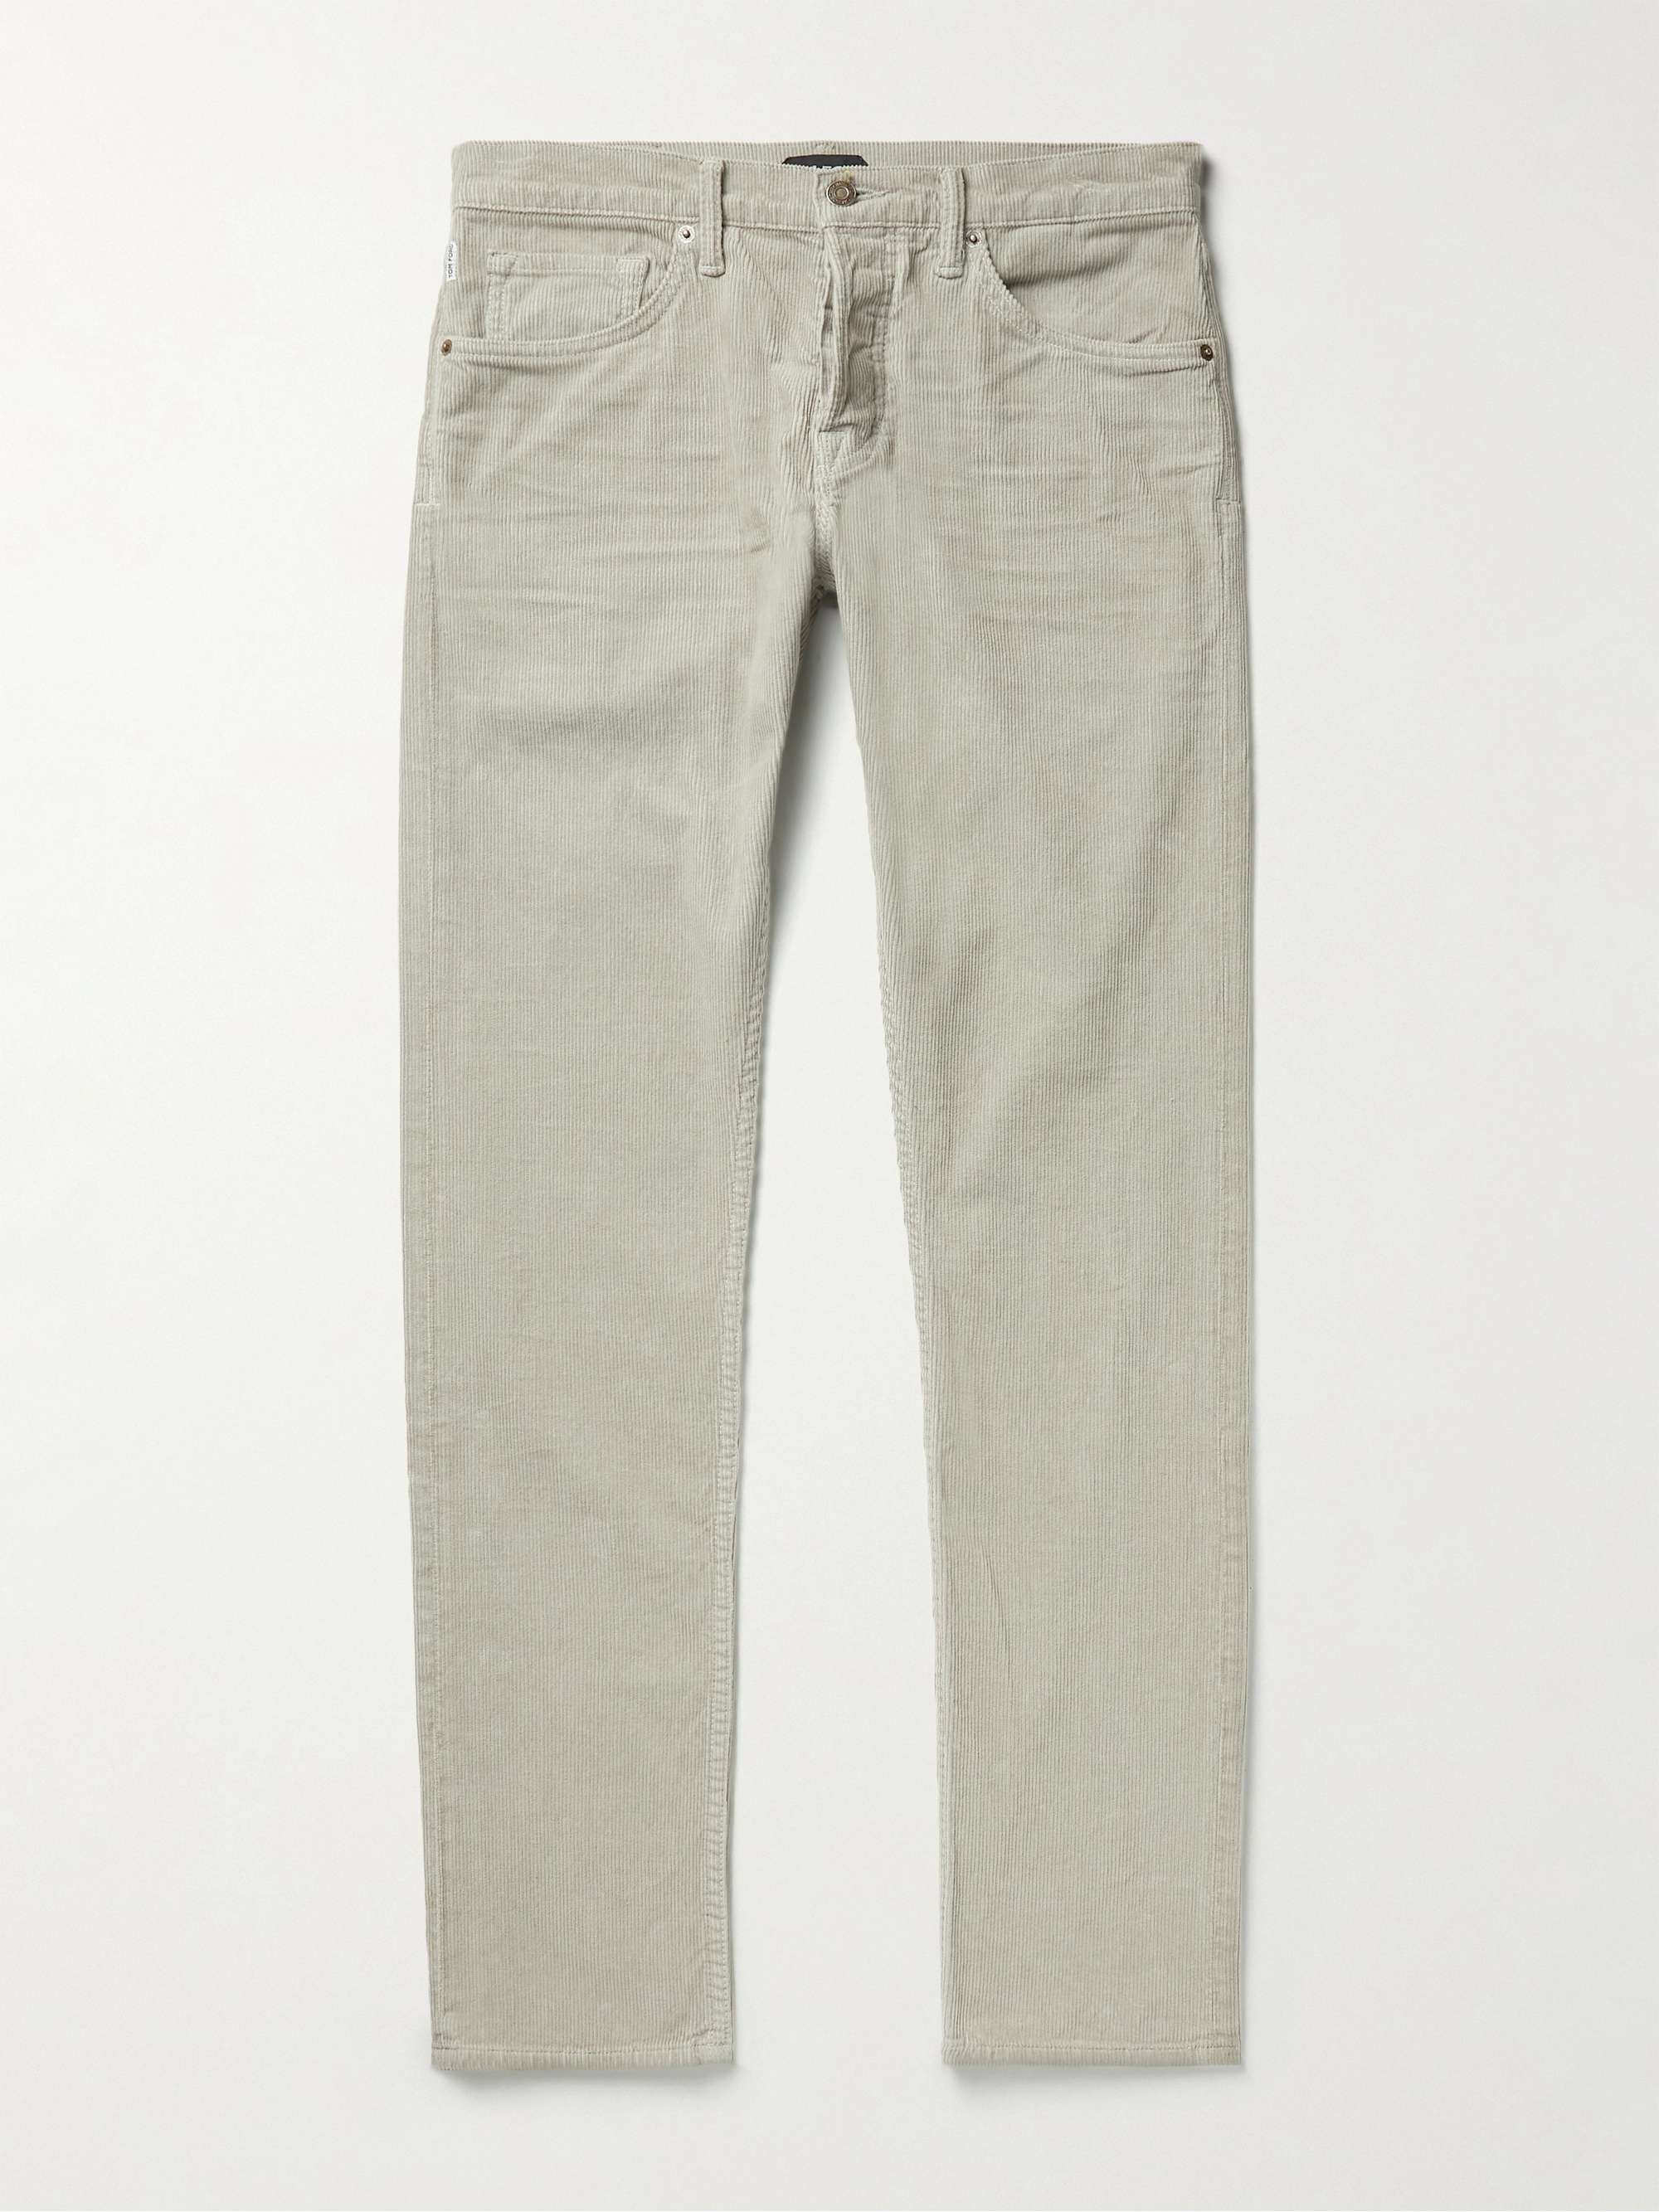 TOM FORD Slim-Fit Garment-Dyed Cotton-Blend Corduroy Trousers